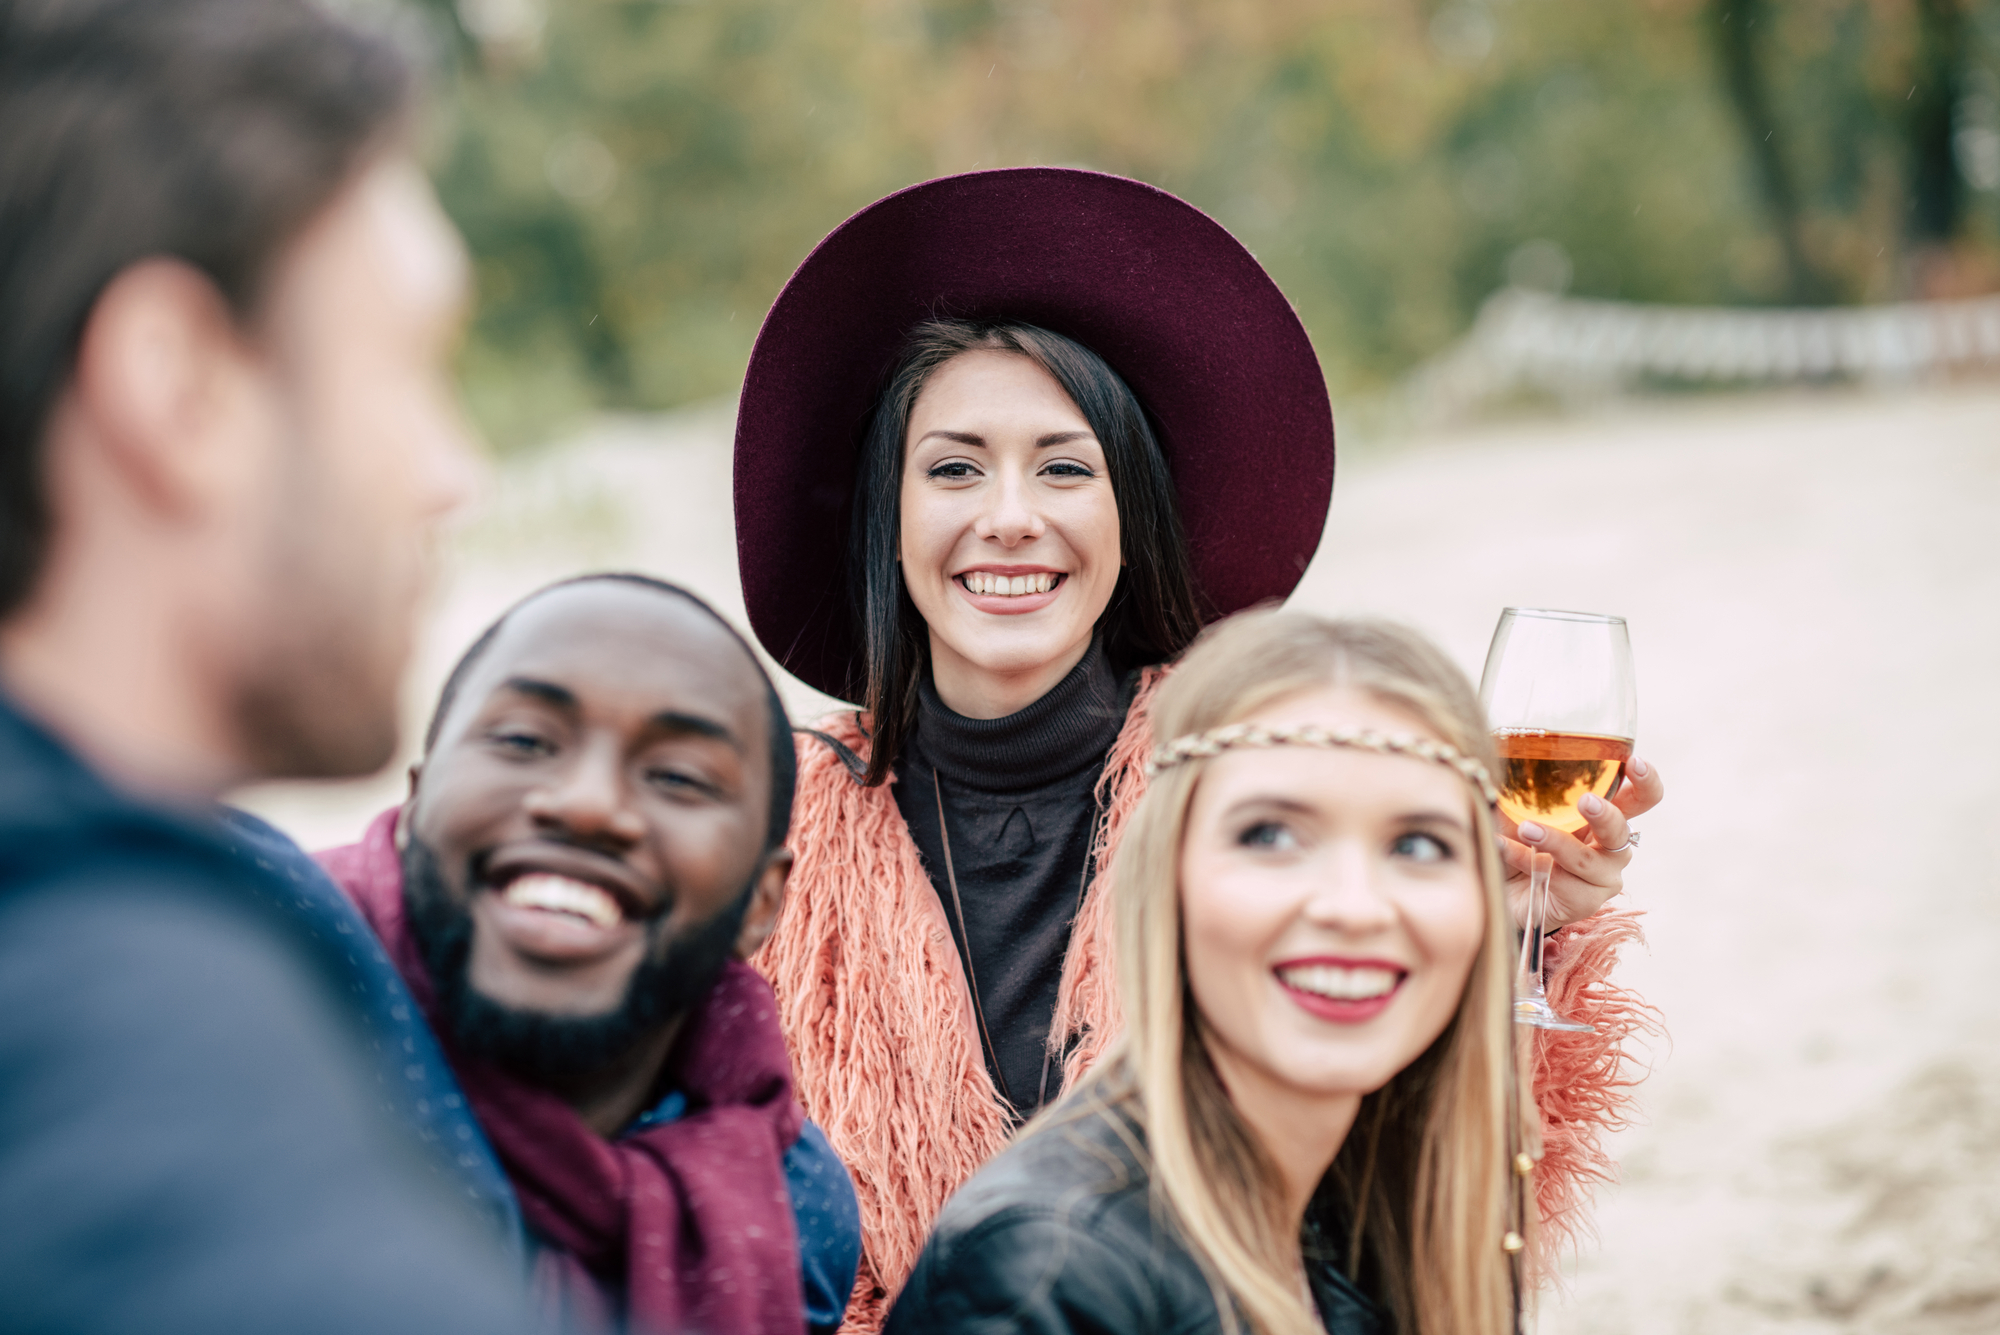 Group of friends enjoying outdoor gathering. Smiling woman in center wears dark hat and holds wine glass. Man on left and woman on right look towards man in foreground. All are cheerful, with blurred outdoor background suggesting a relaxed and casual setting.